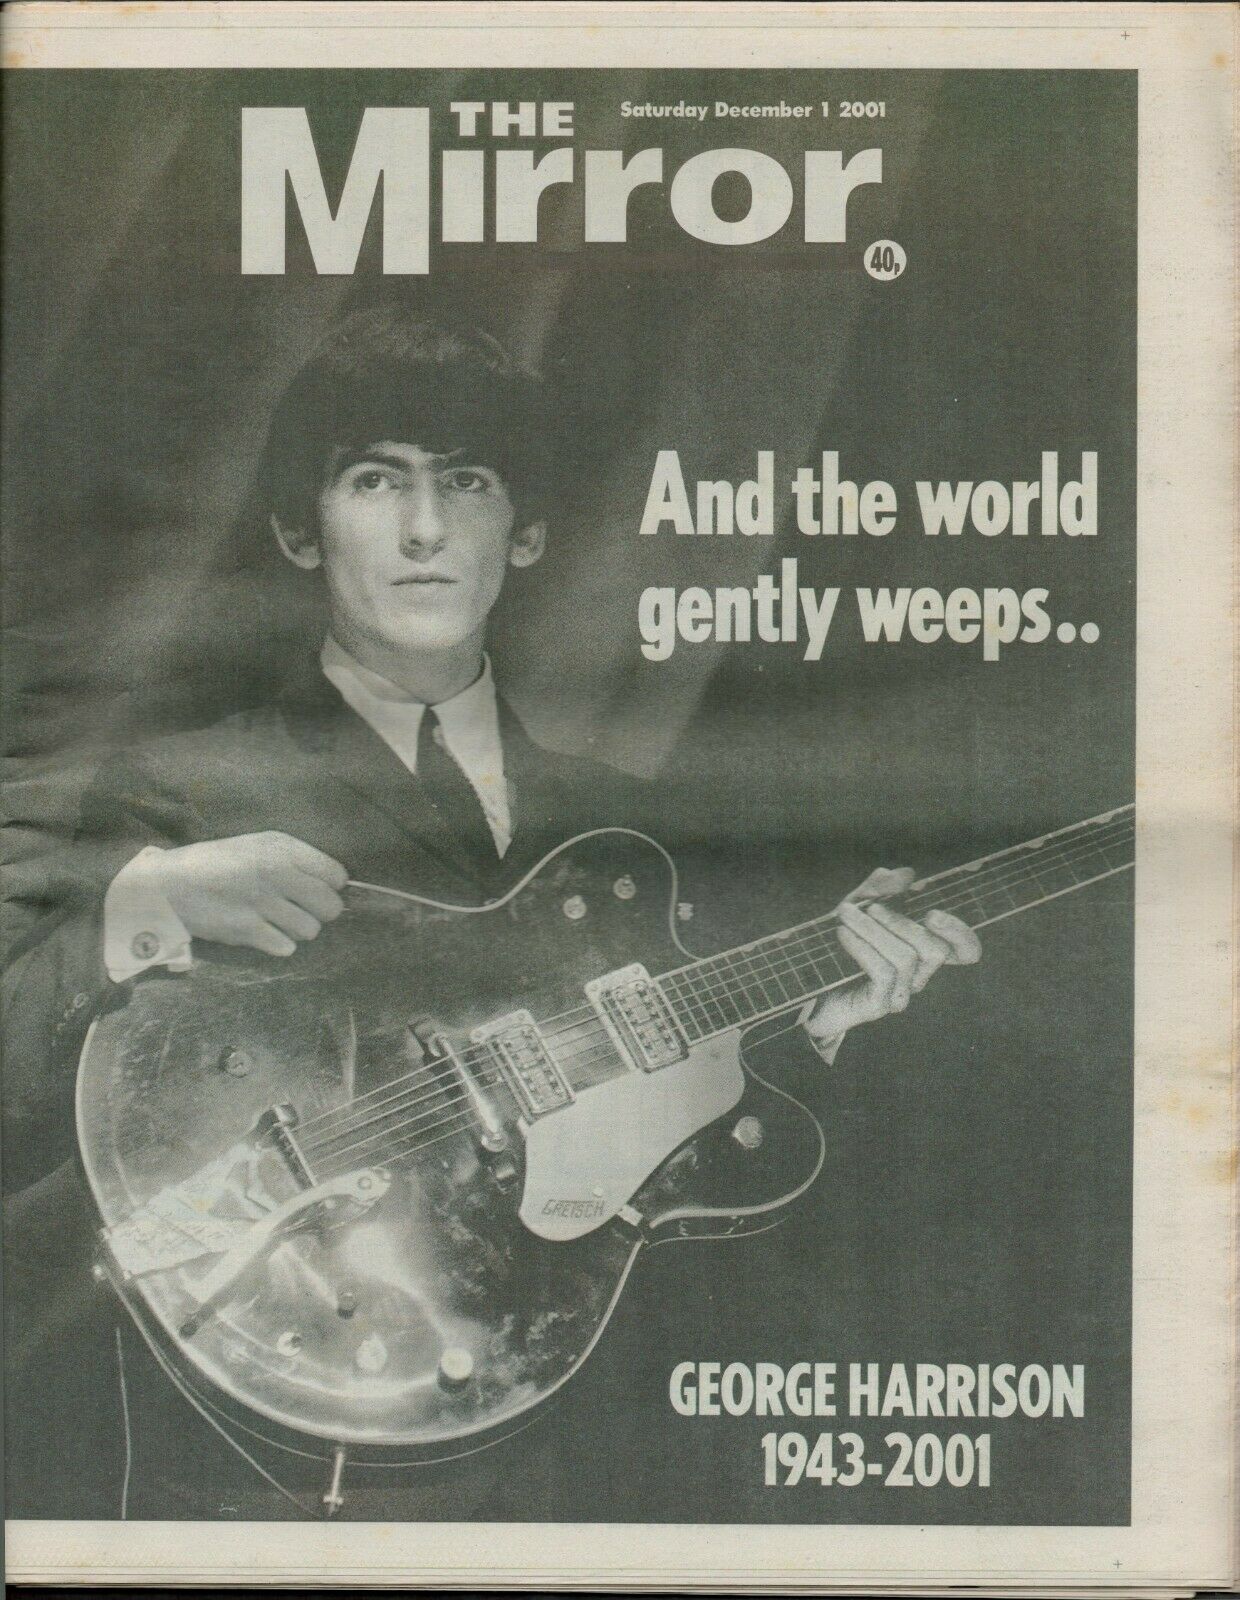 The Beatles George Harrison Is Dead And The World Weeps Newspaper